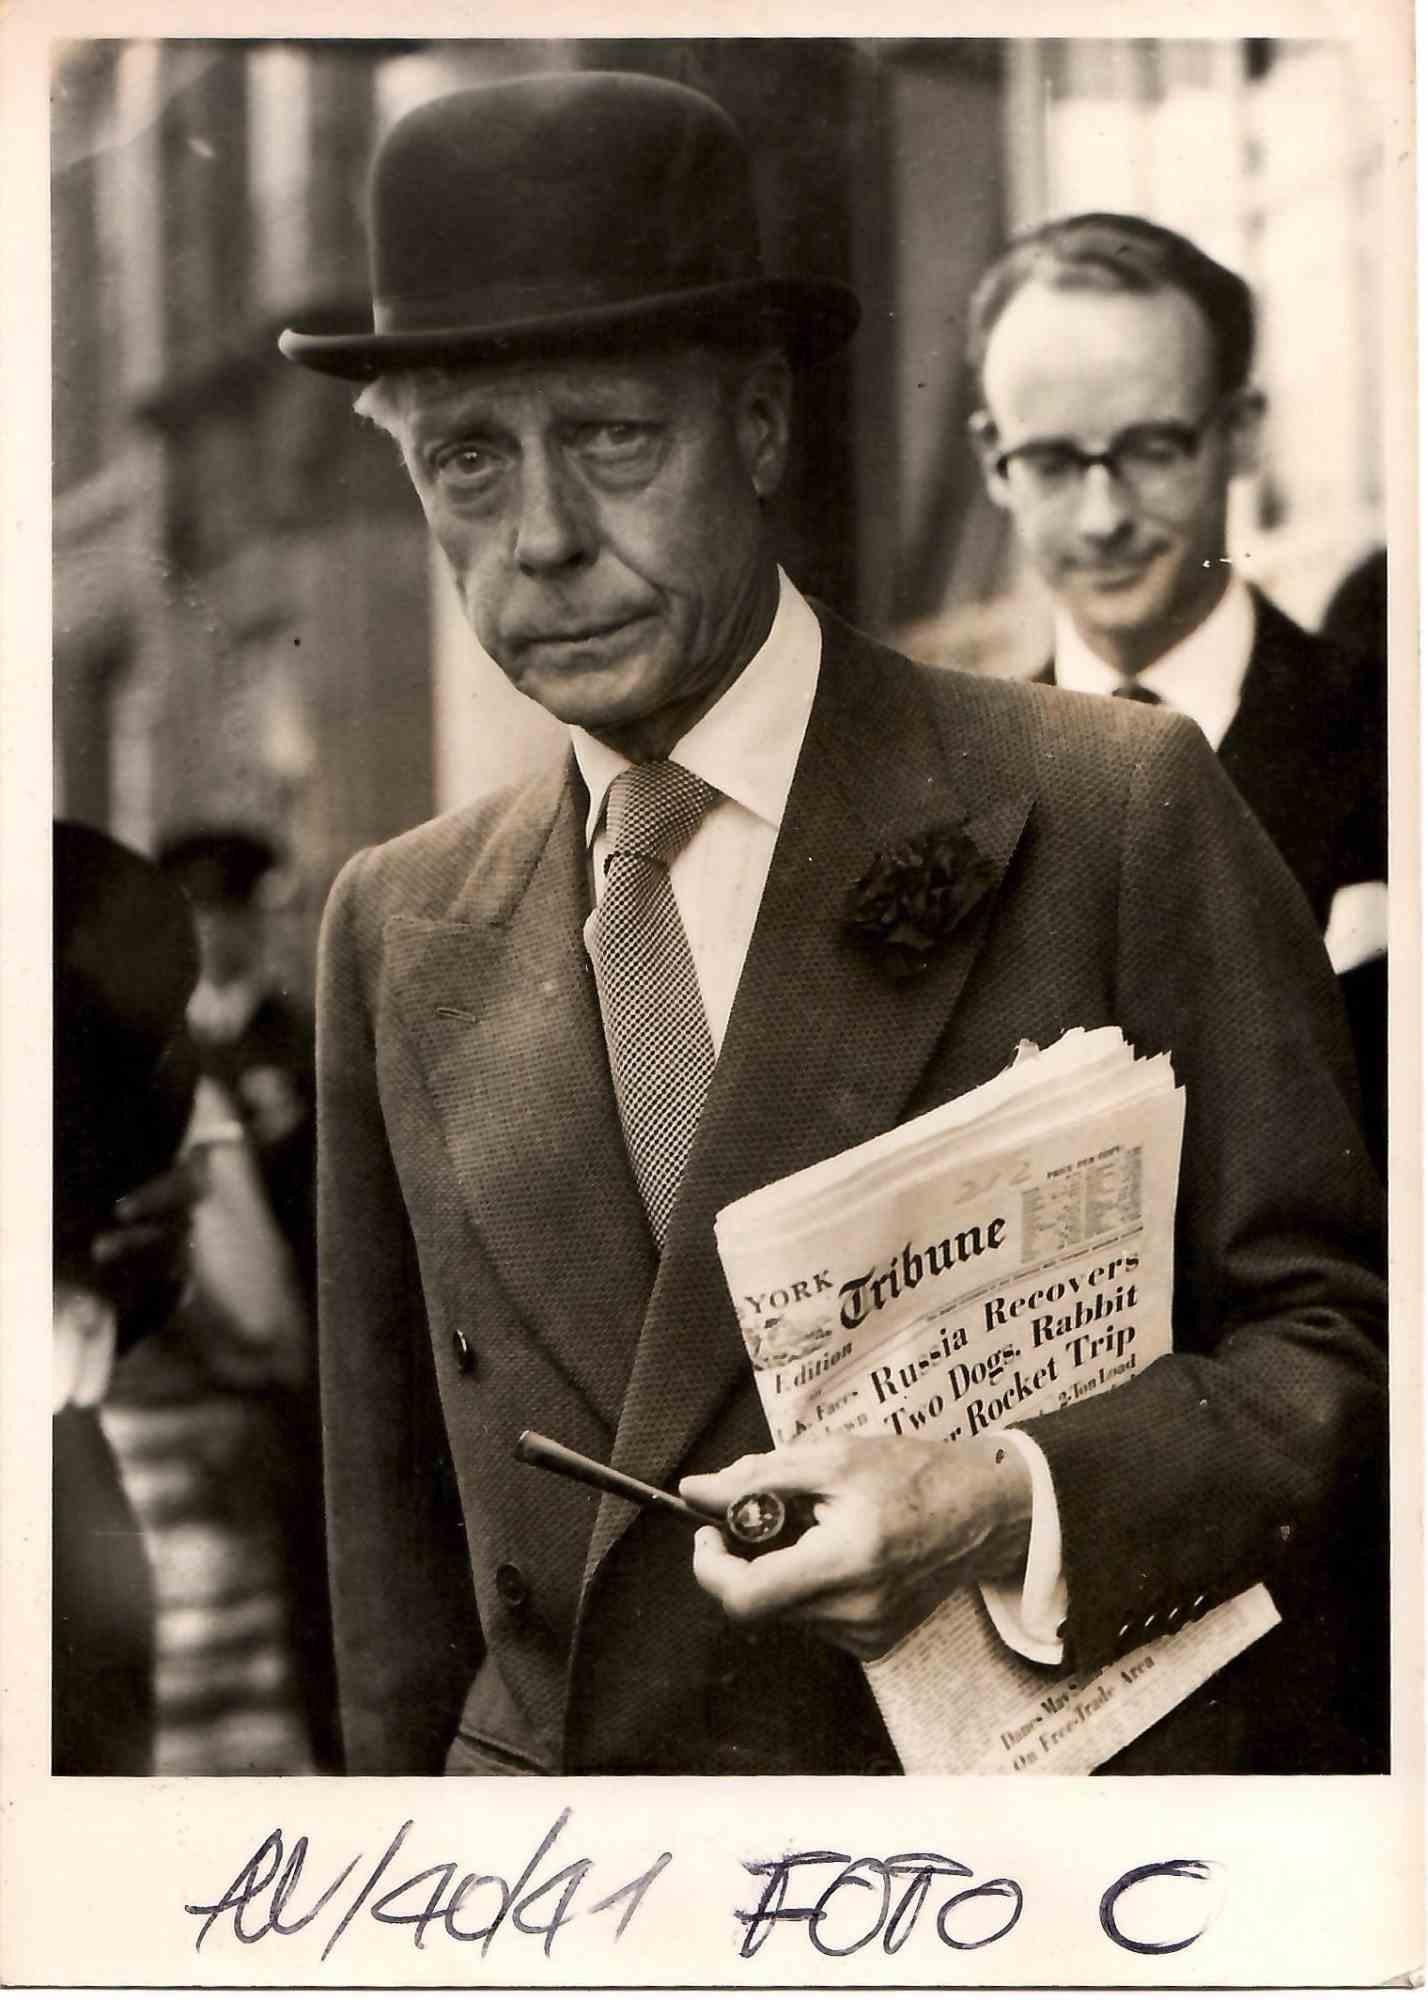 Unknown Portrait Photograph - The Duke of Windsor in London - Vintage B/W photo - 1940s